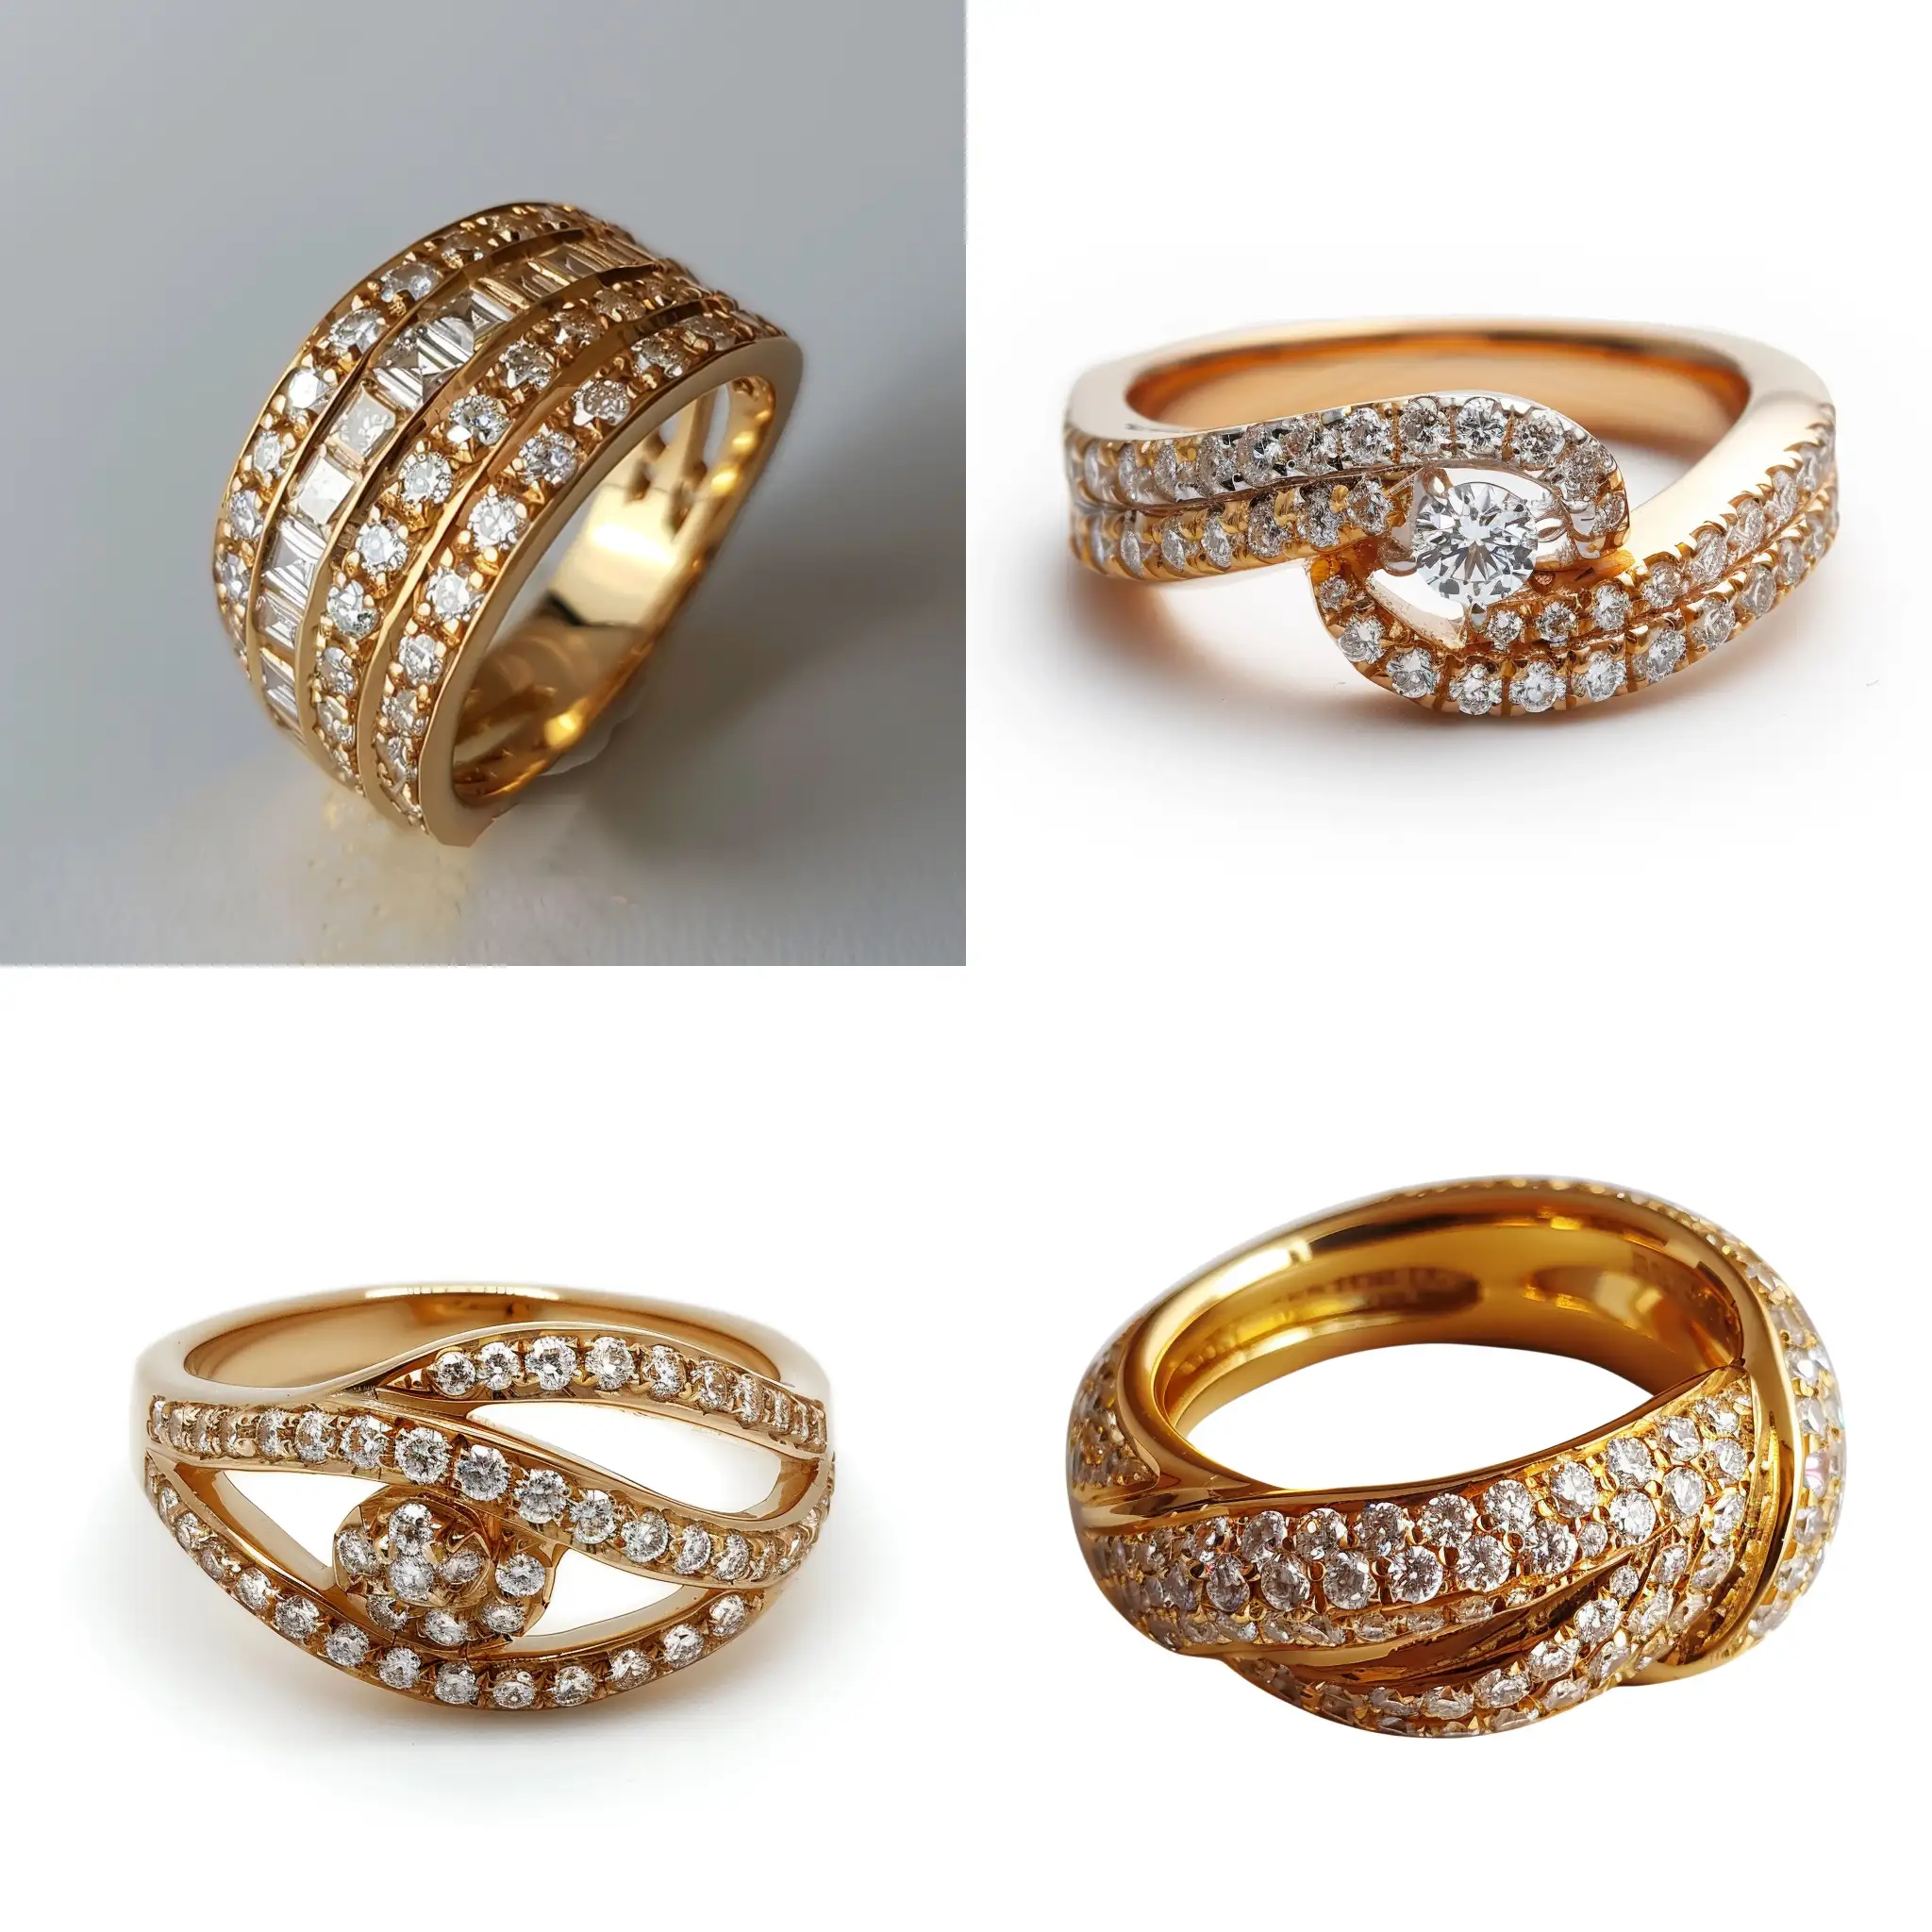 Luxurious-Gold-and-Diamond-Ring-in-Jacob-Co-Style